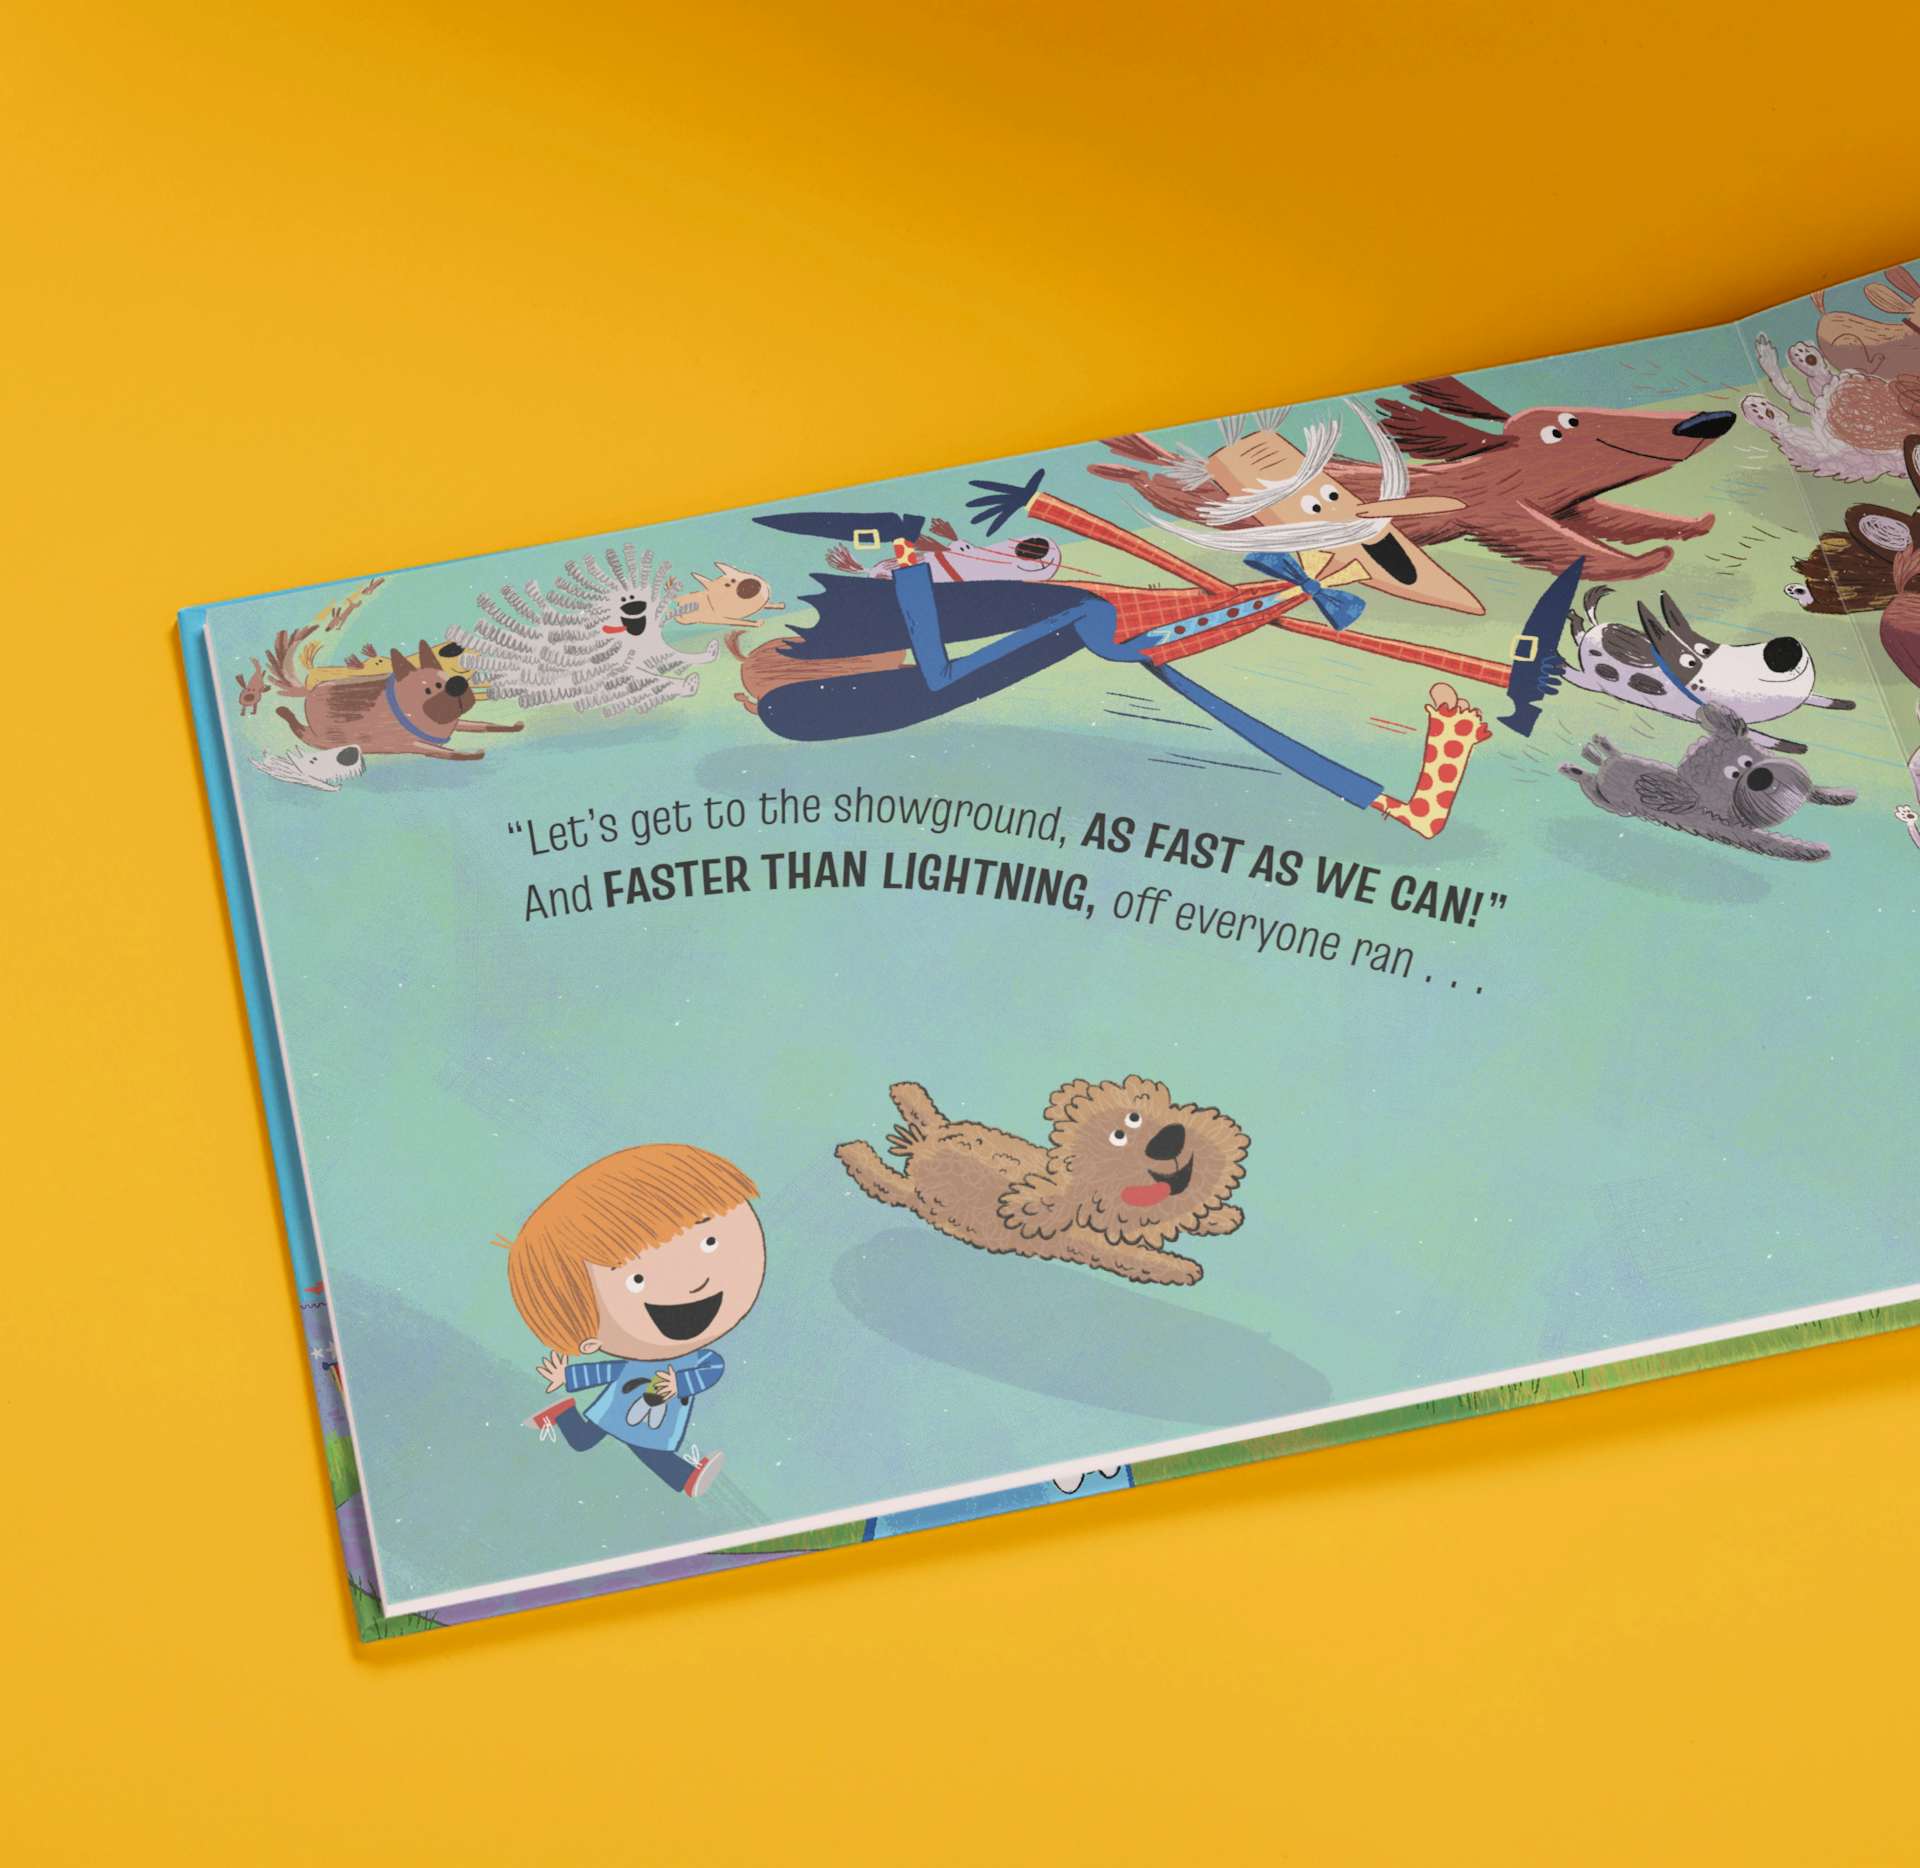 Inside the personalised book